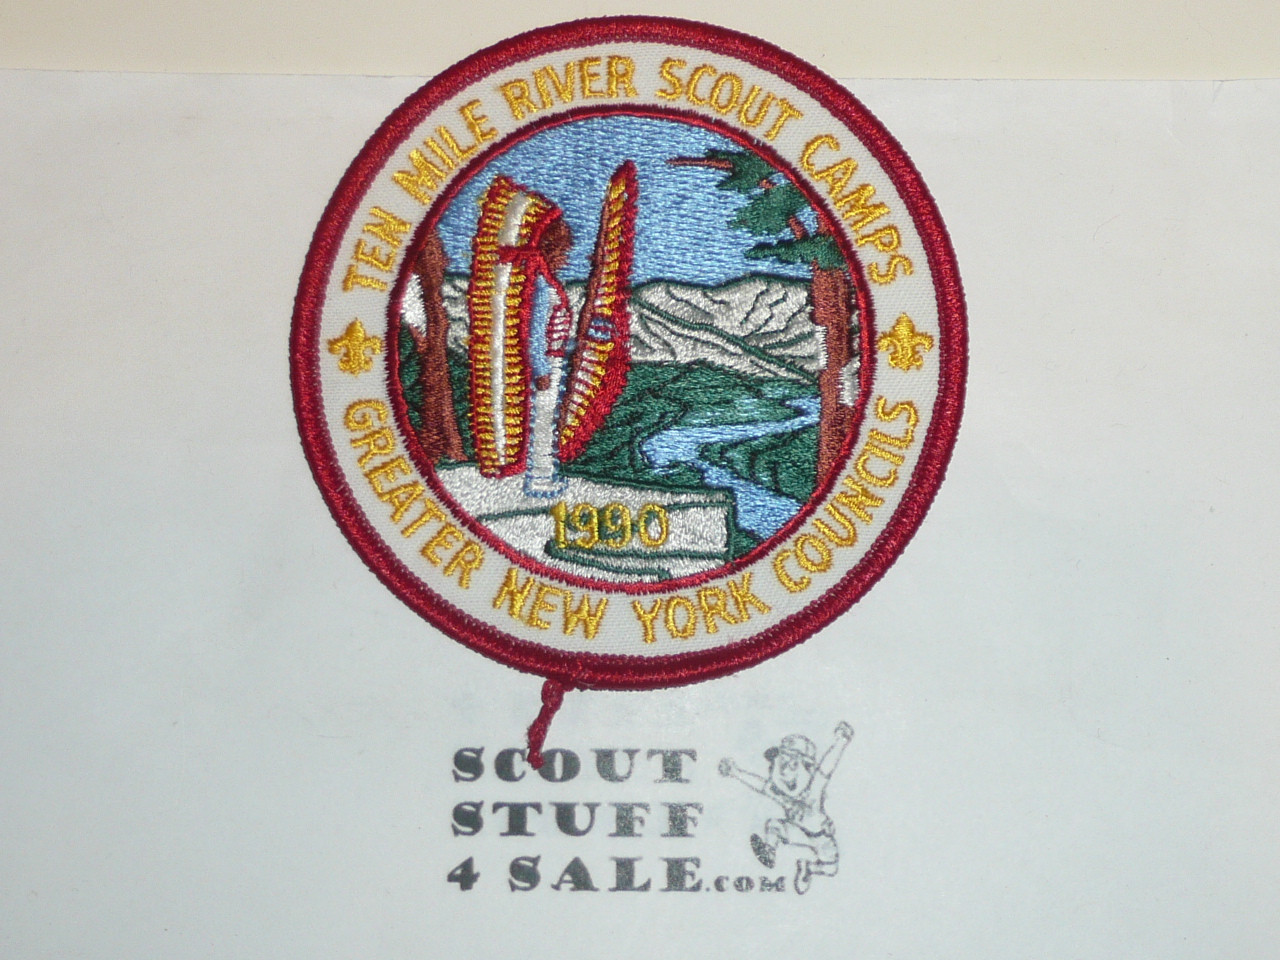 Ten Mile River Camp Patch, Greater New York Councils, 1990